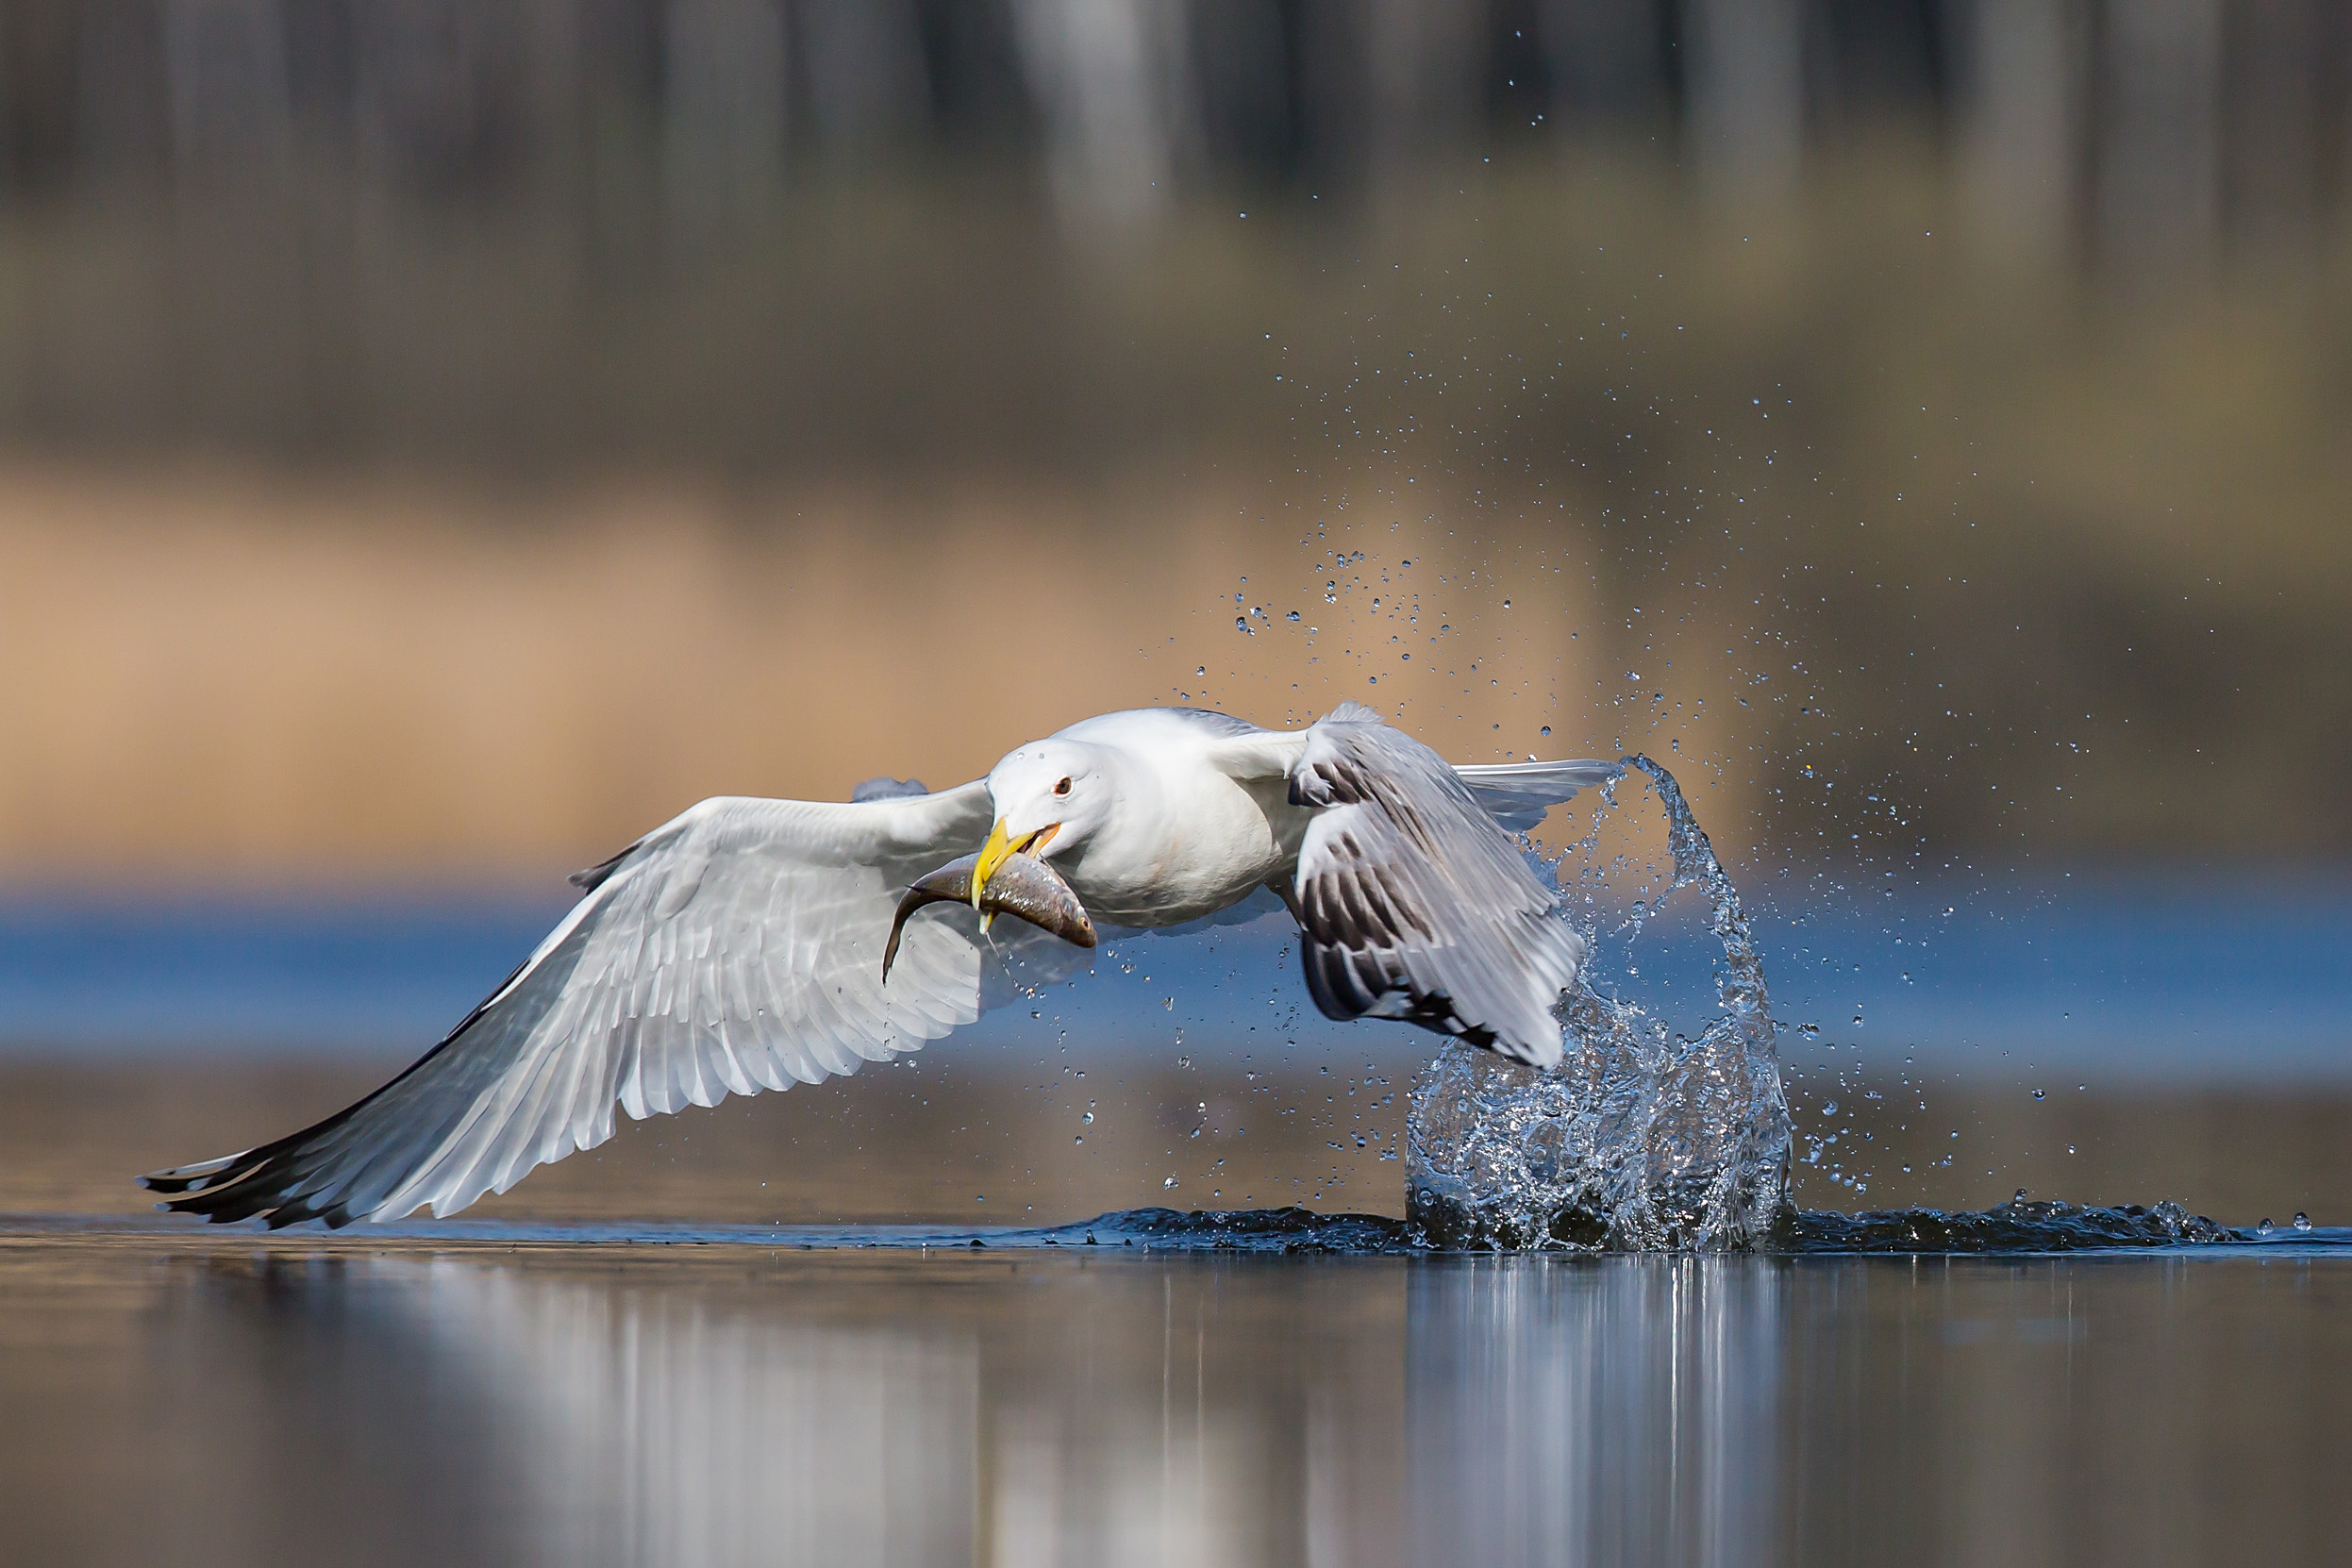 A Herring Gull flying low over a body of water after catching a fish.